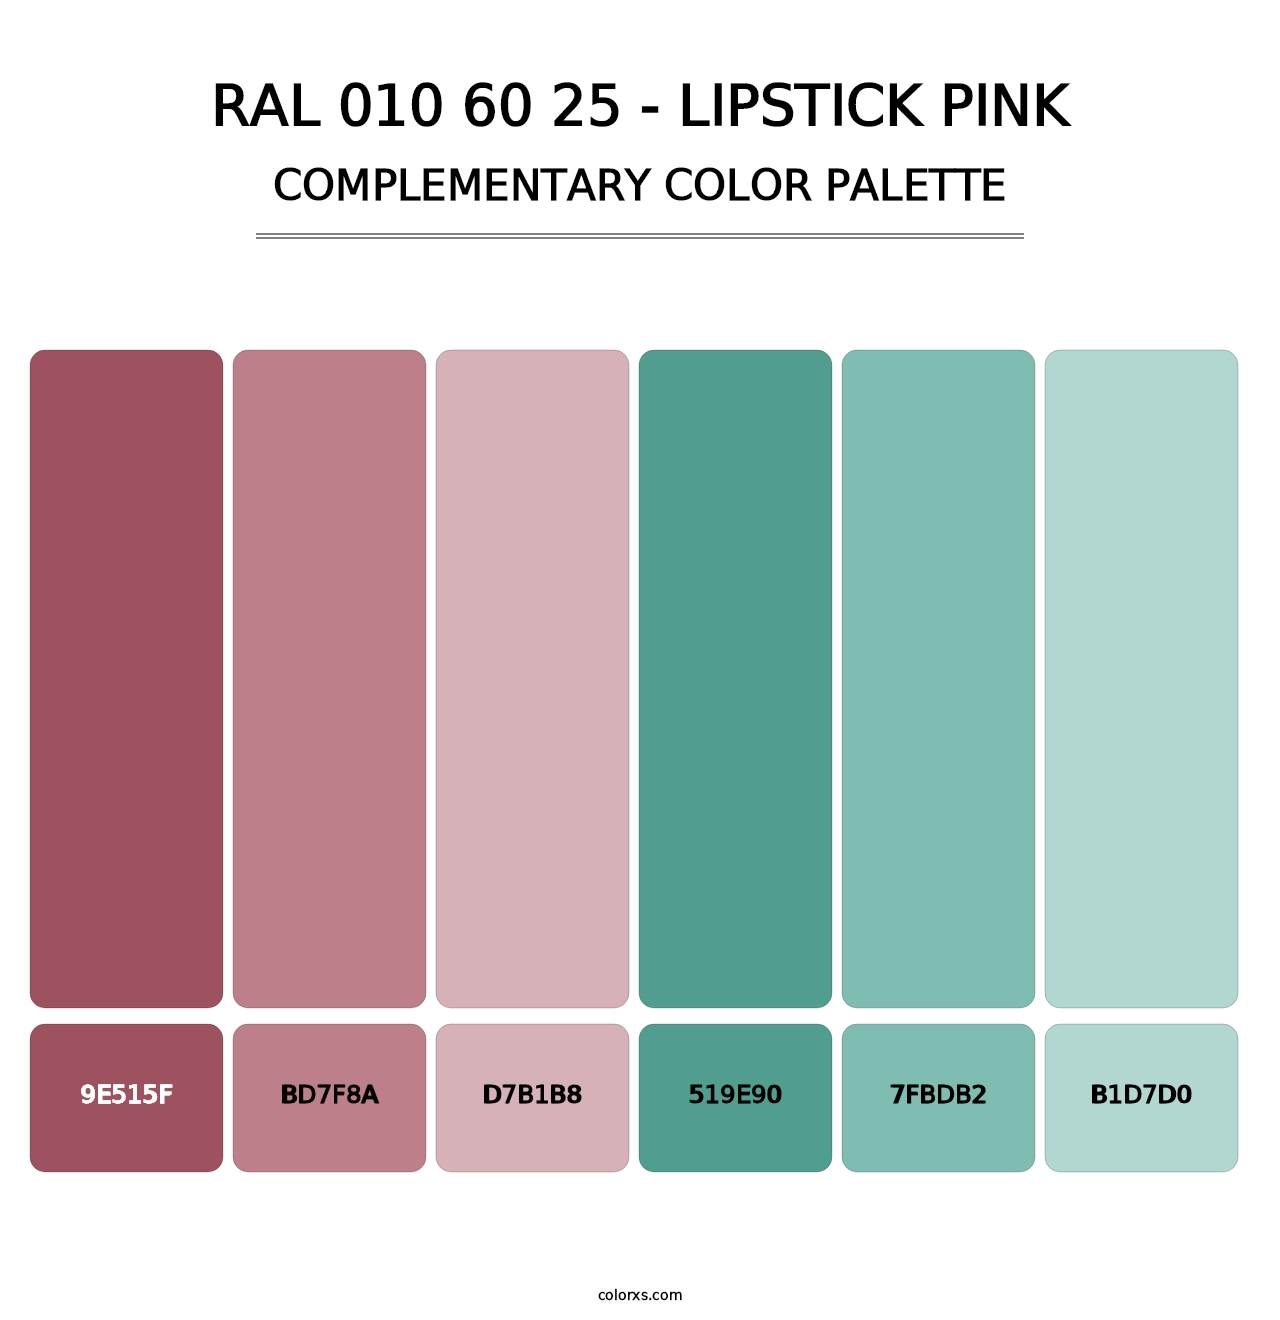 RAL 010 60 25 - Lipstick Pink - Complementary Color Palette